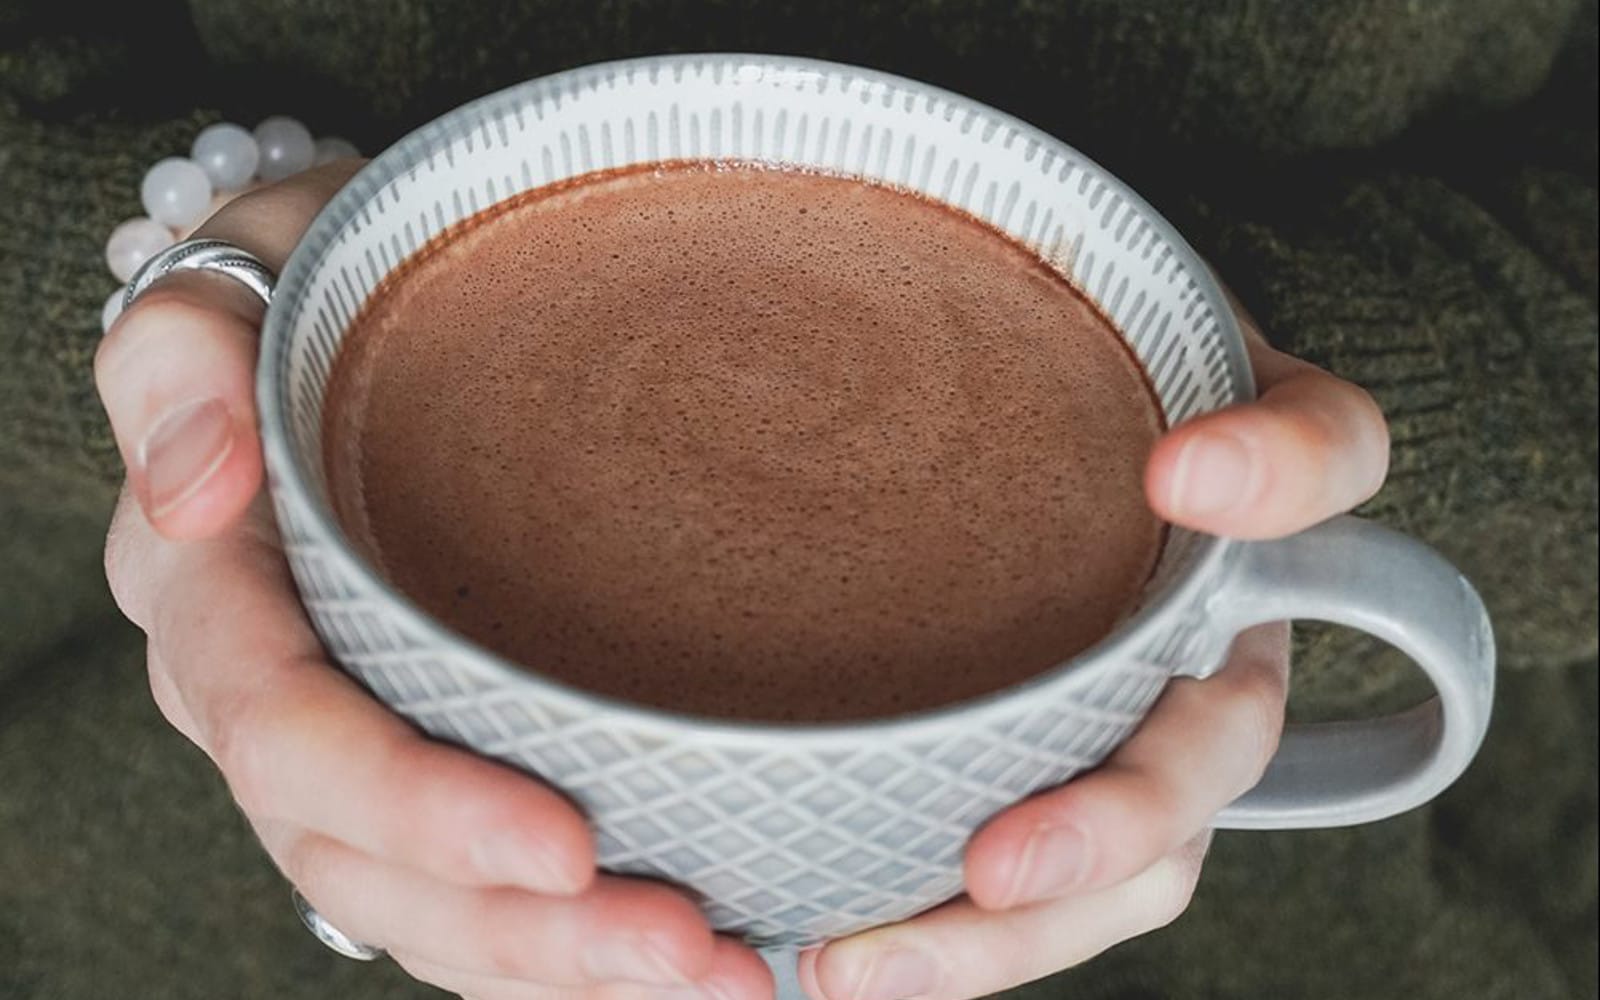 Hot Chocolate "Macaccino" with spices